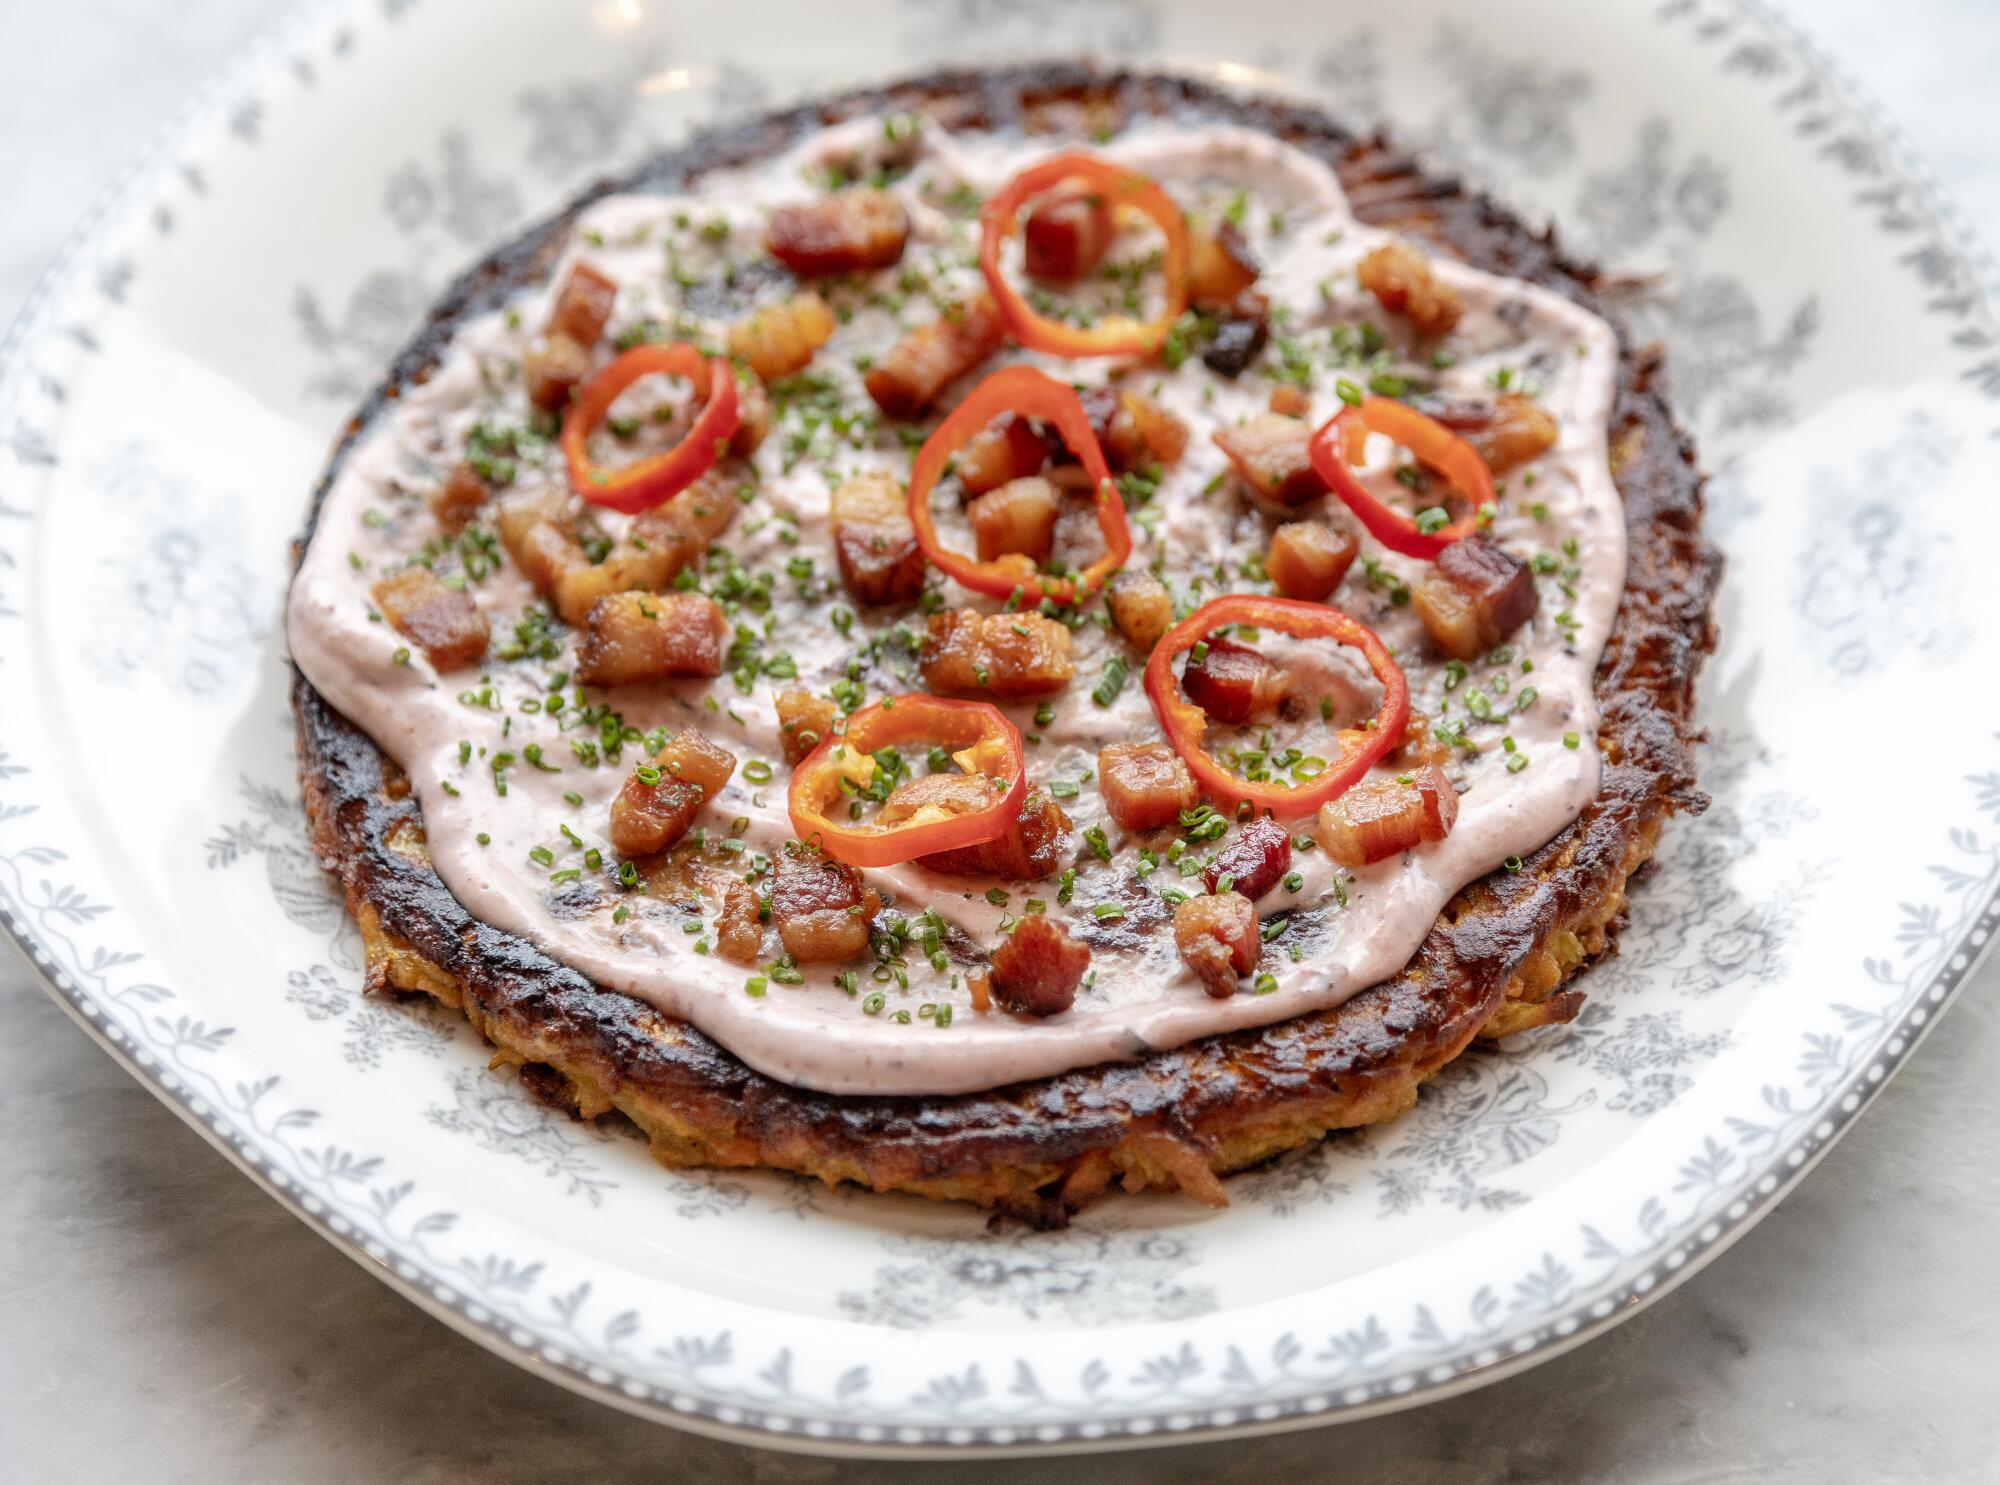 A sweet potato pancake with cream and peppers at Fiona.